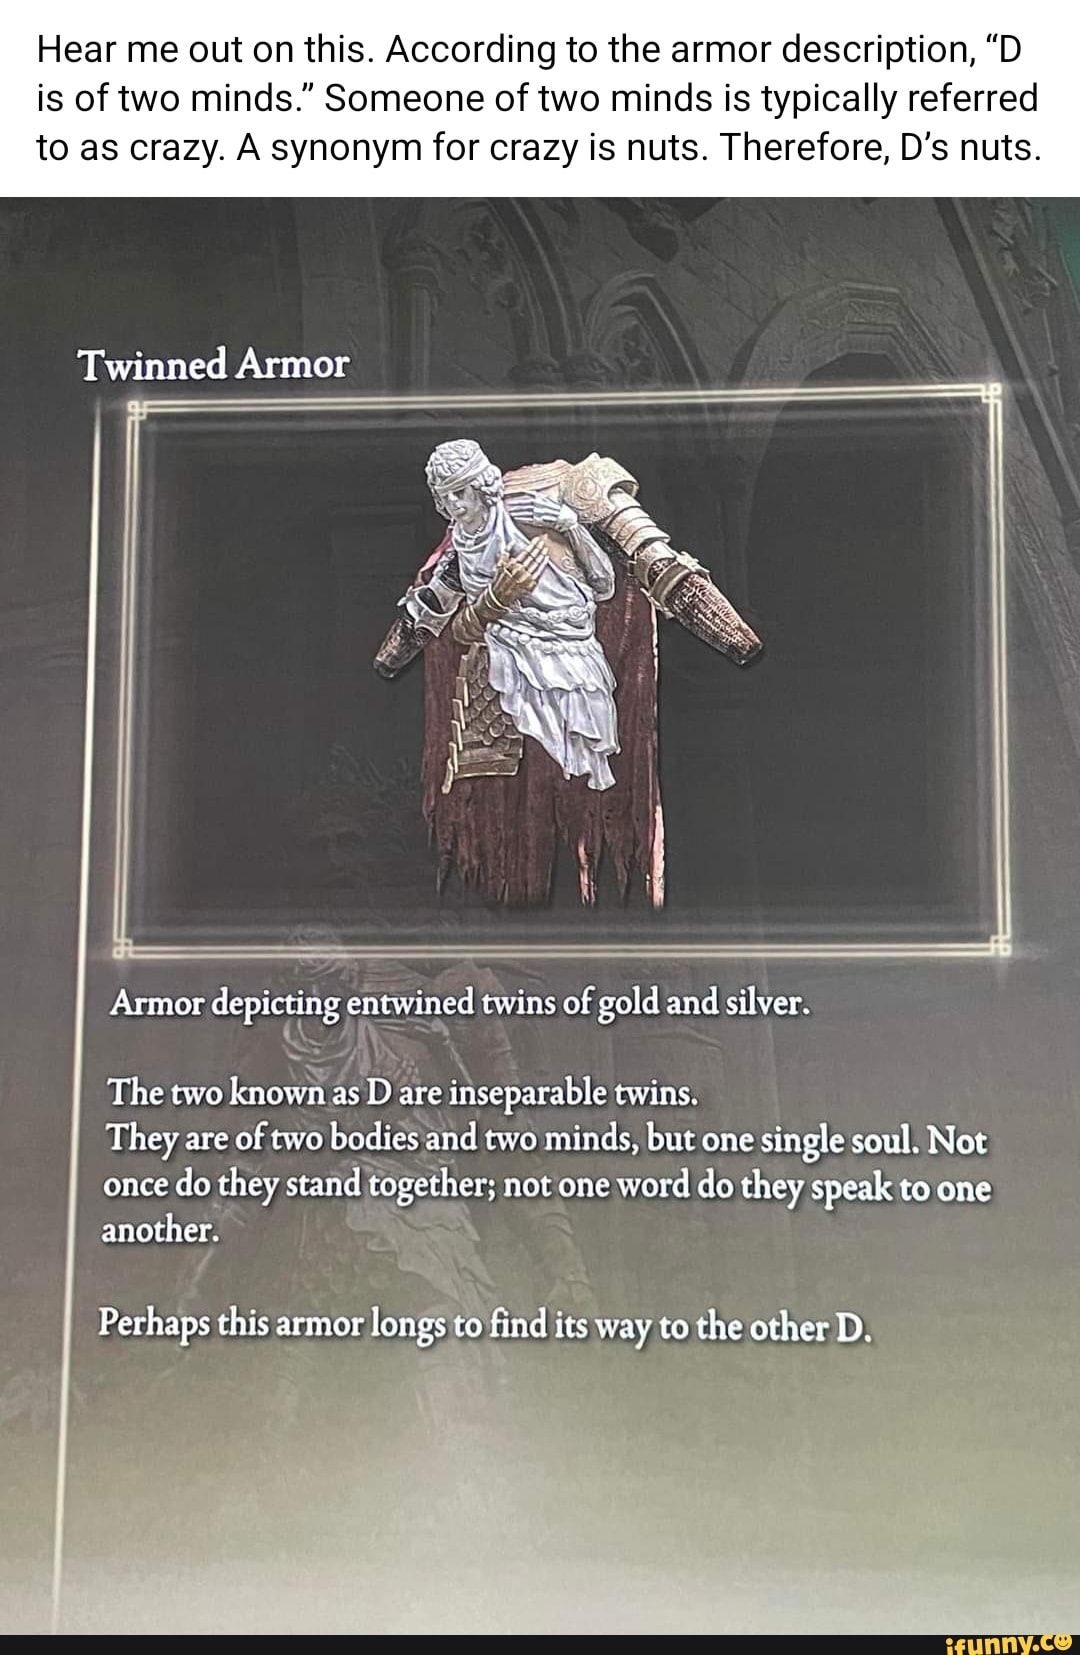 Hear me out on this. According to the armor description, D is of